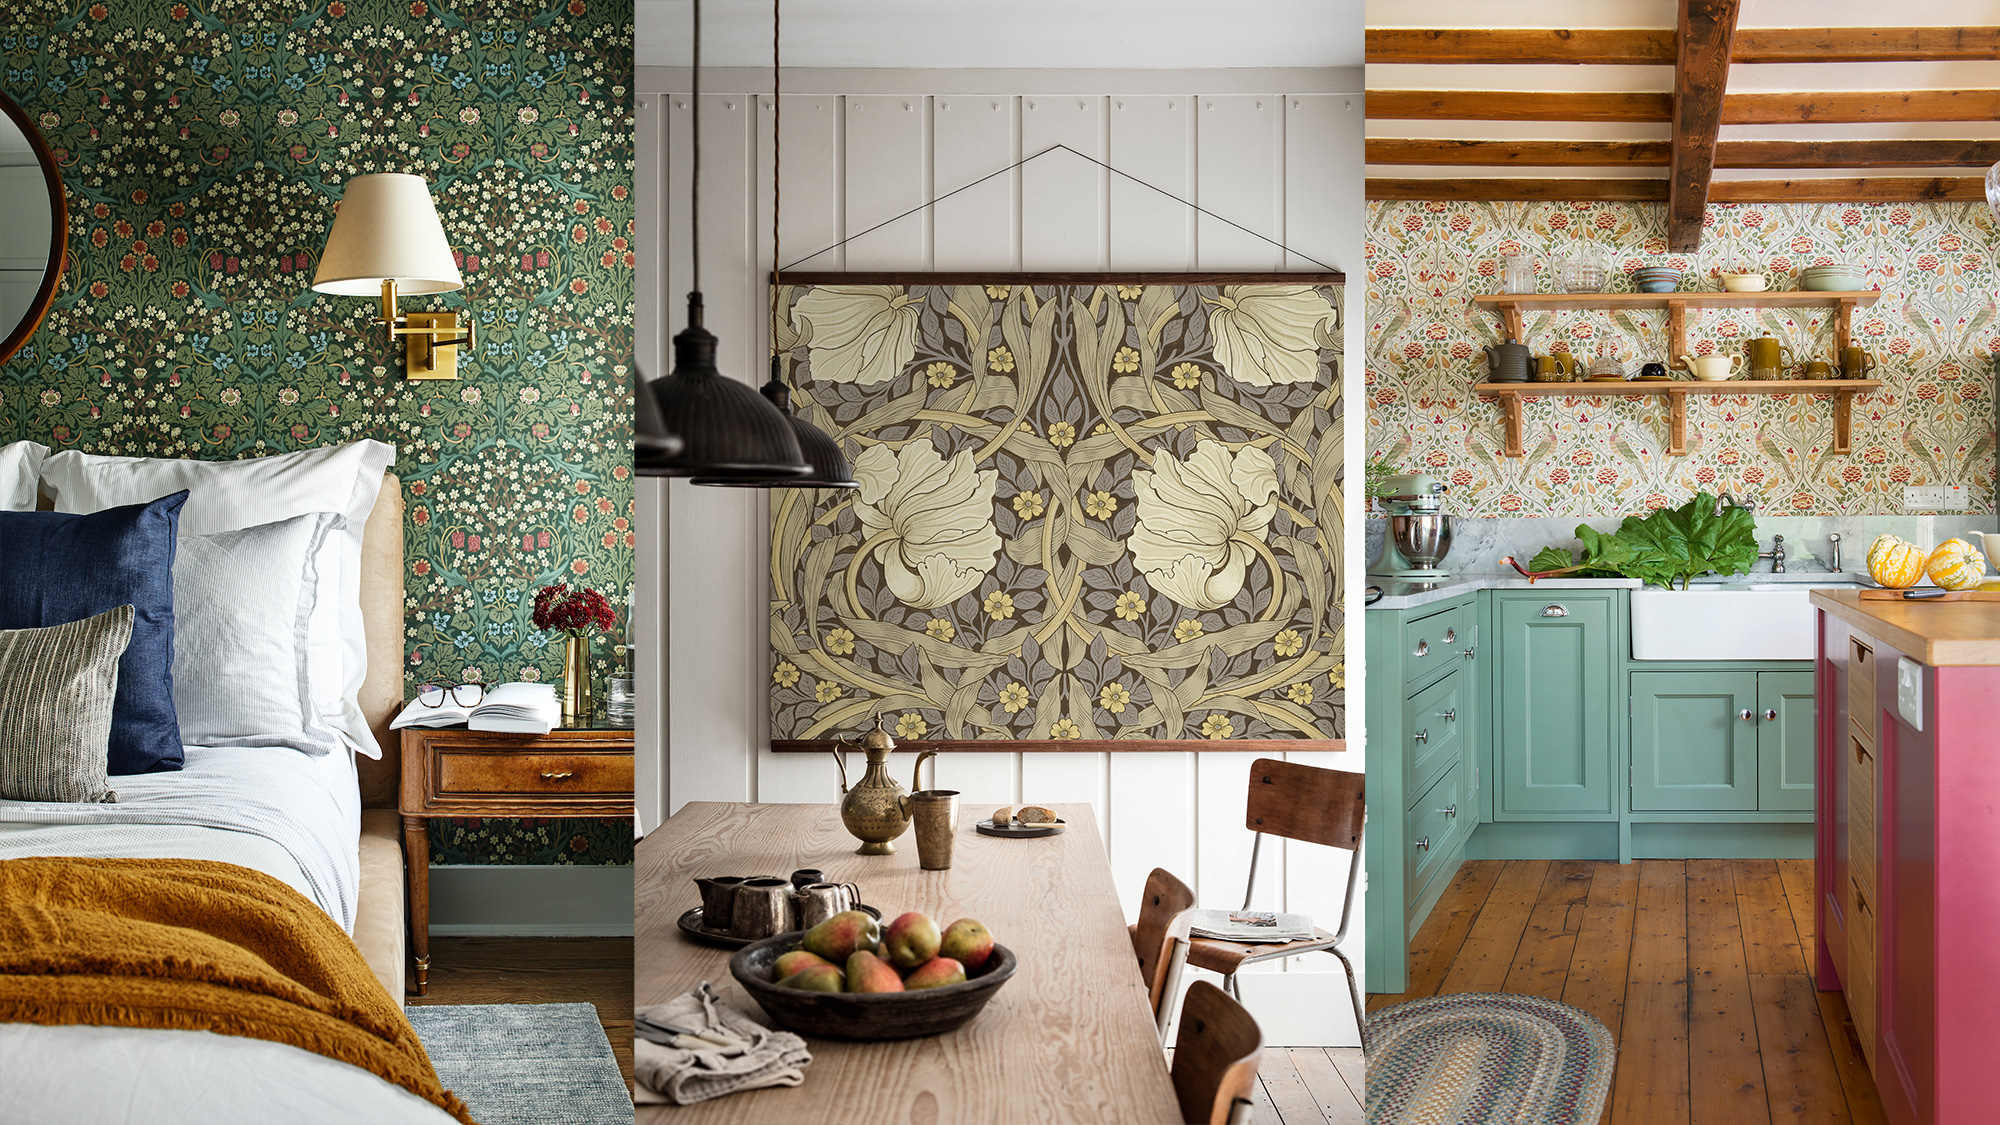 Arts and crafts decor: 12 ways to embrace heritage style |